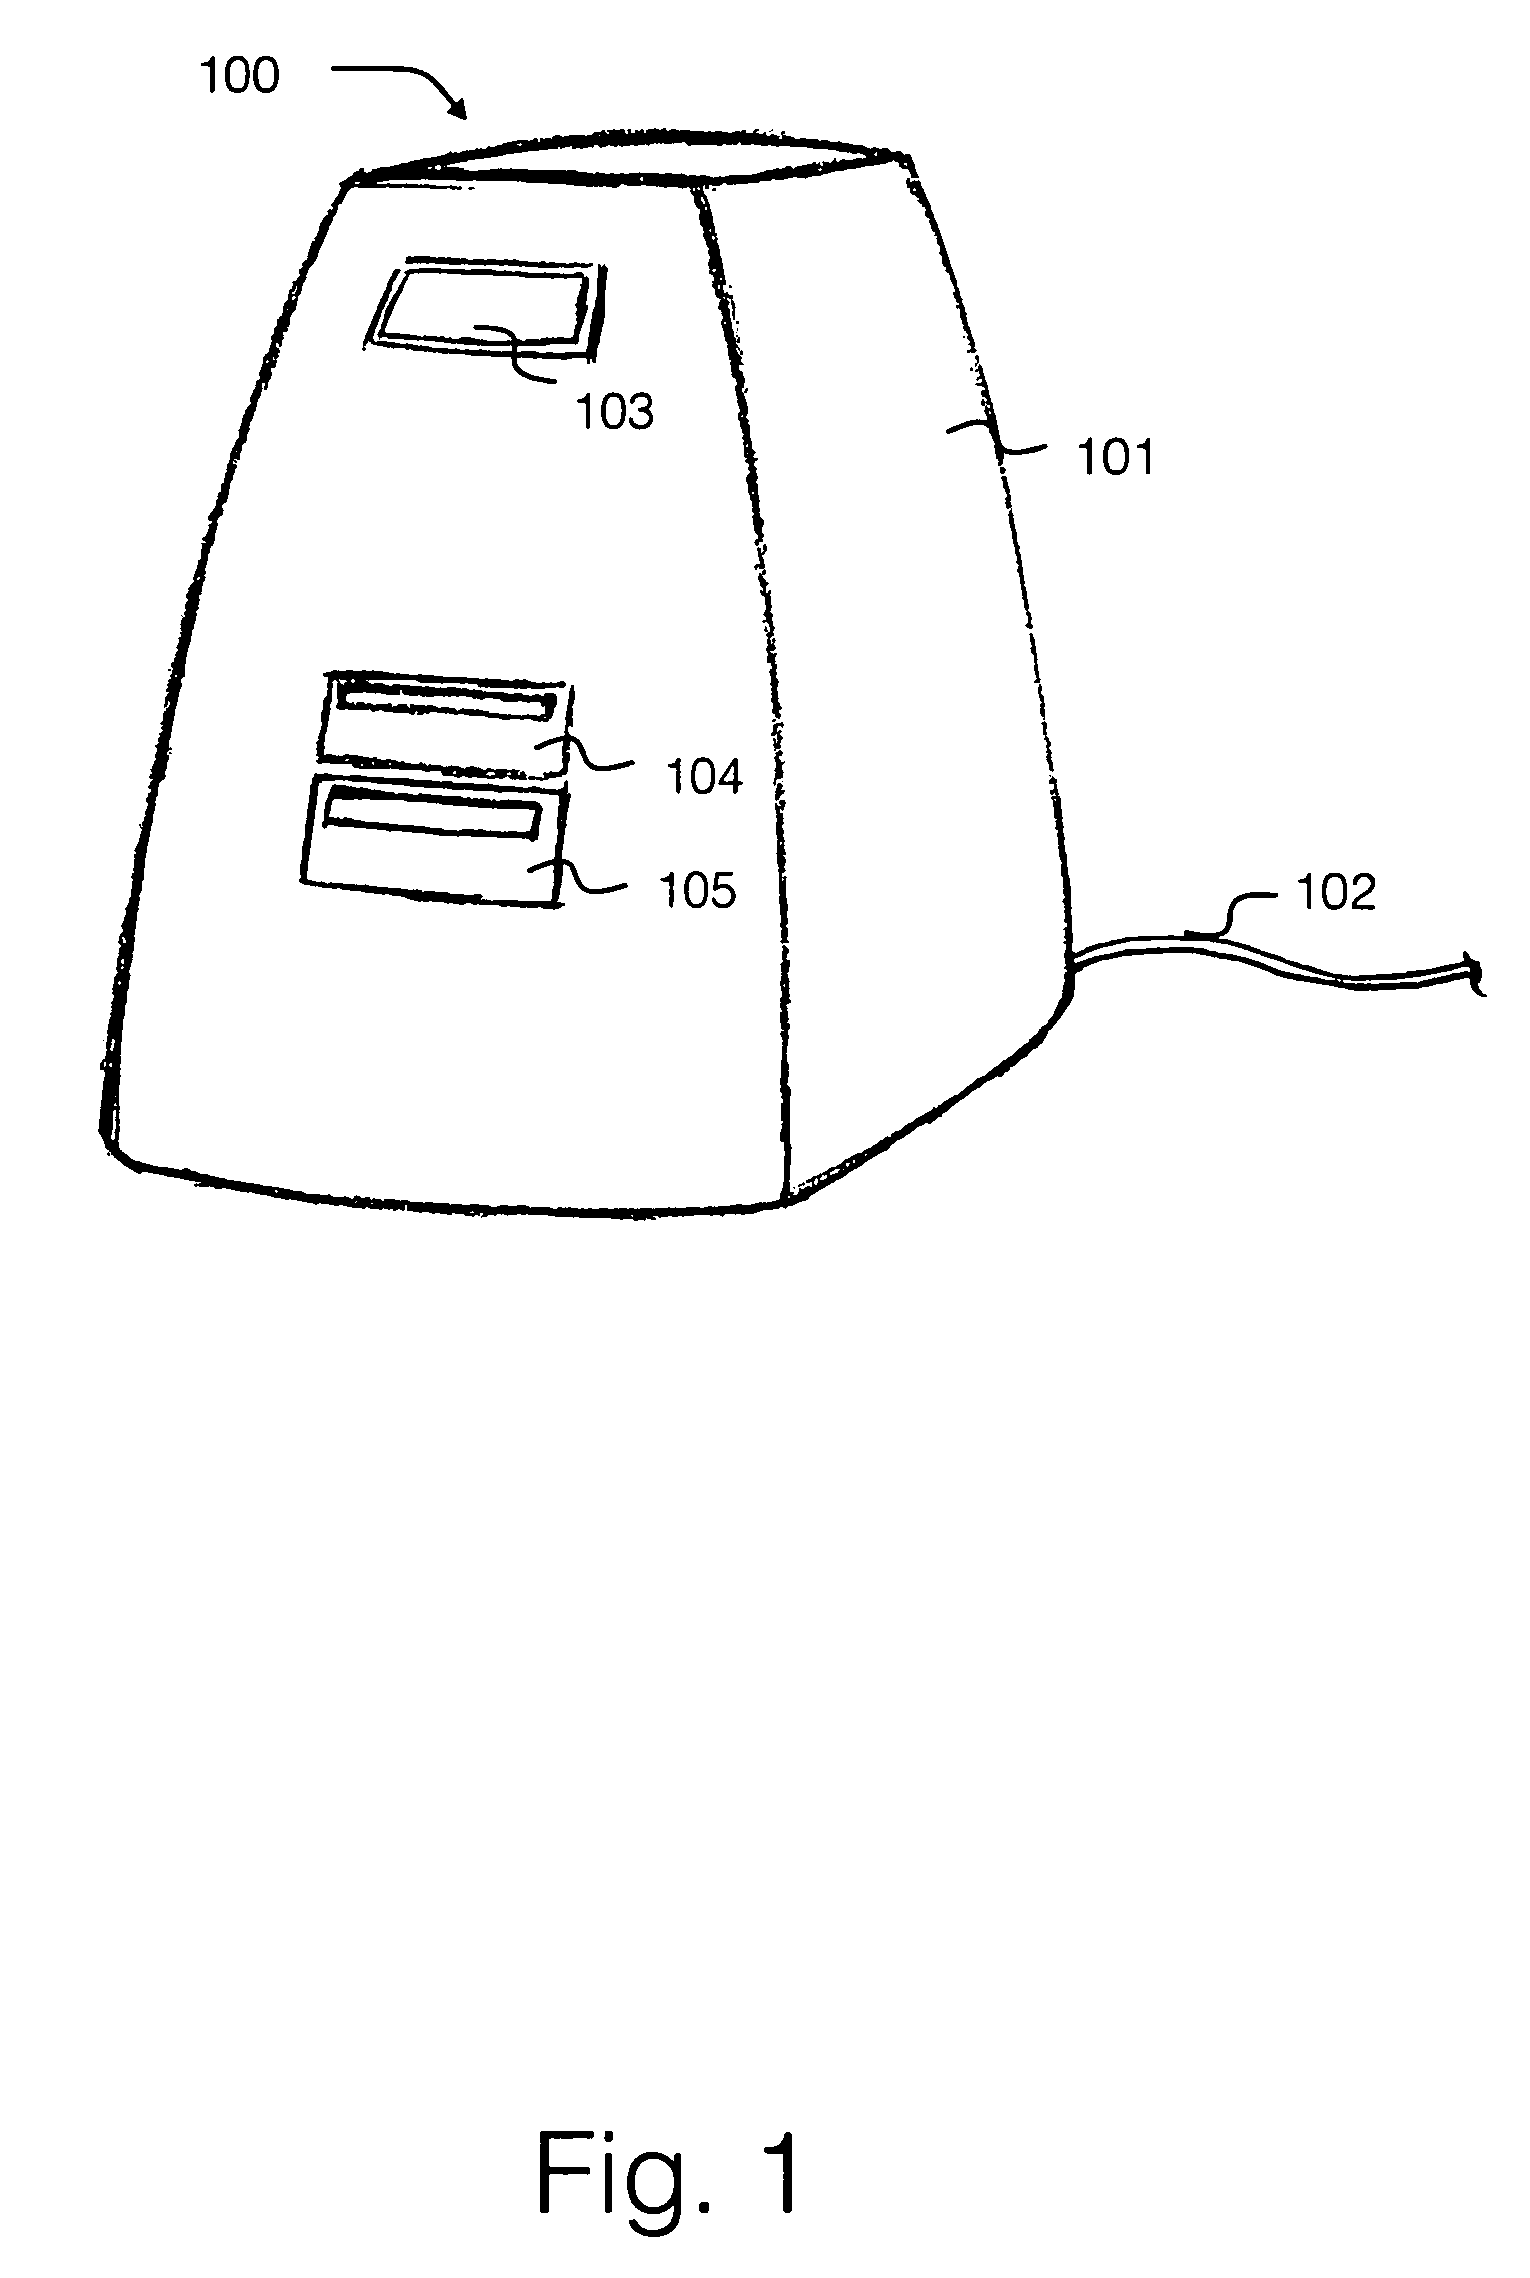 Method of manufacturing operating system master template, method of manufacturing a computer entity and product resulting therefrom, and method of producing a production version of an operating system